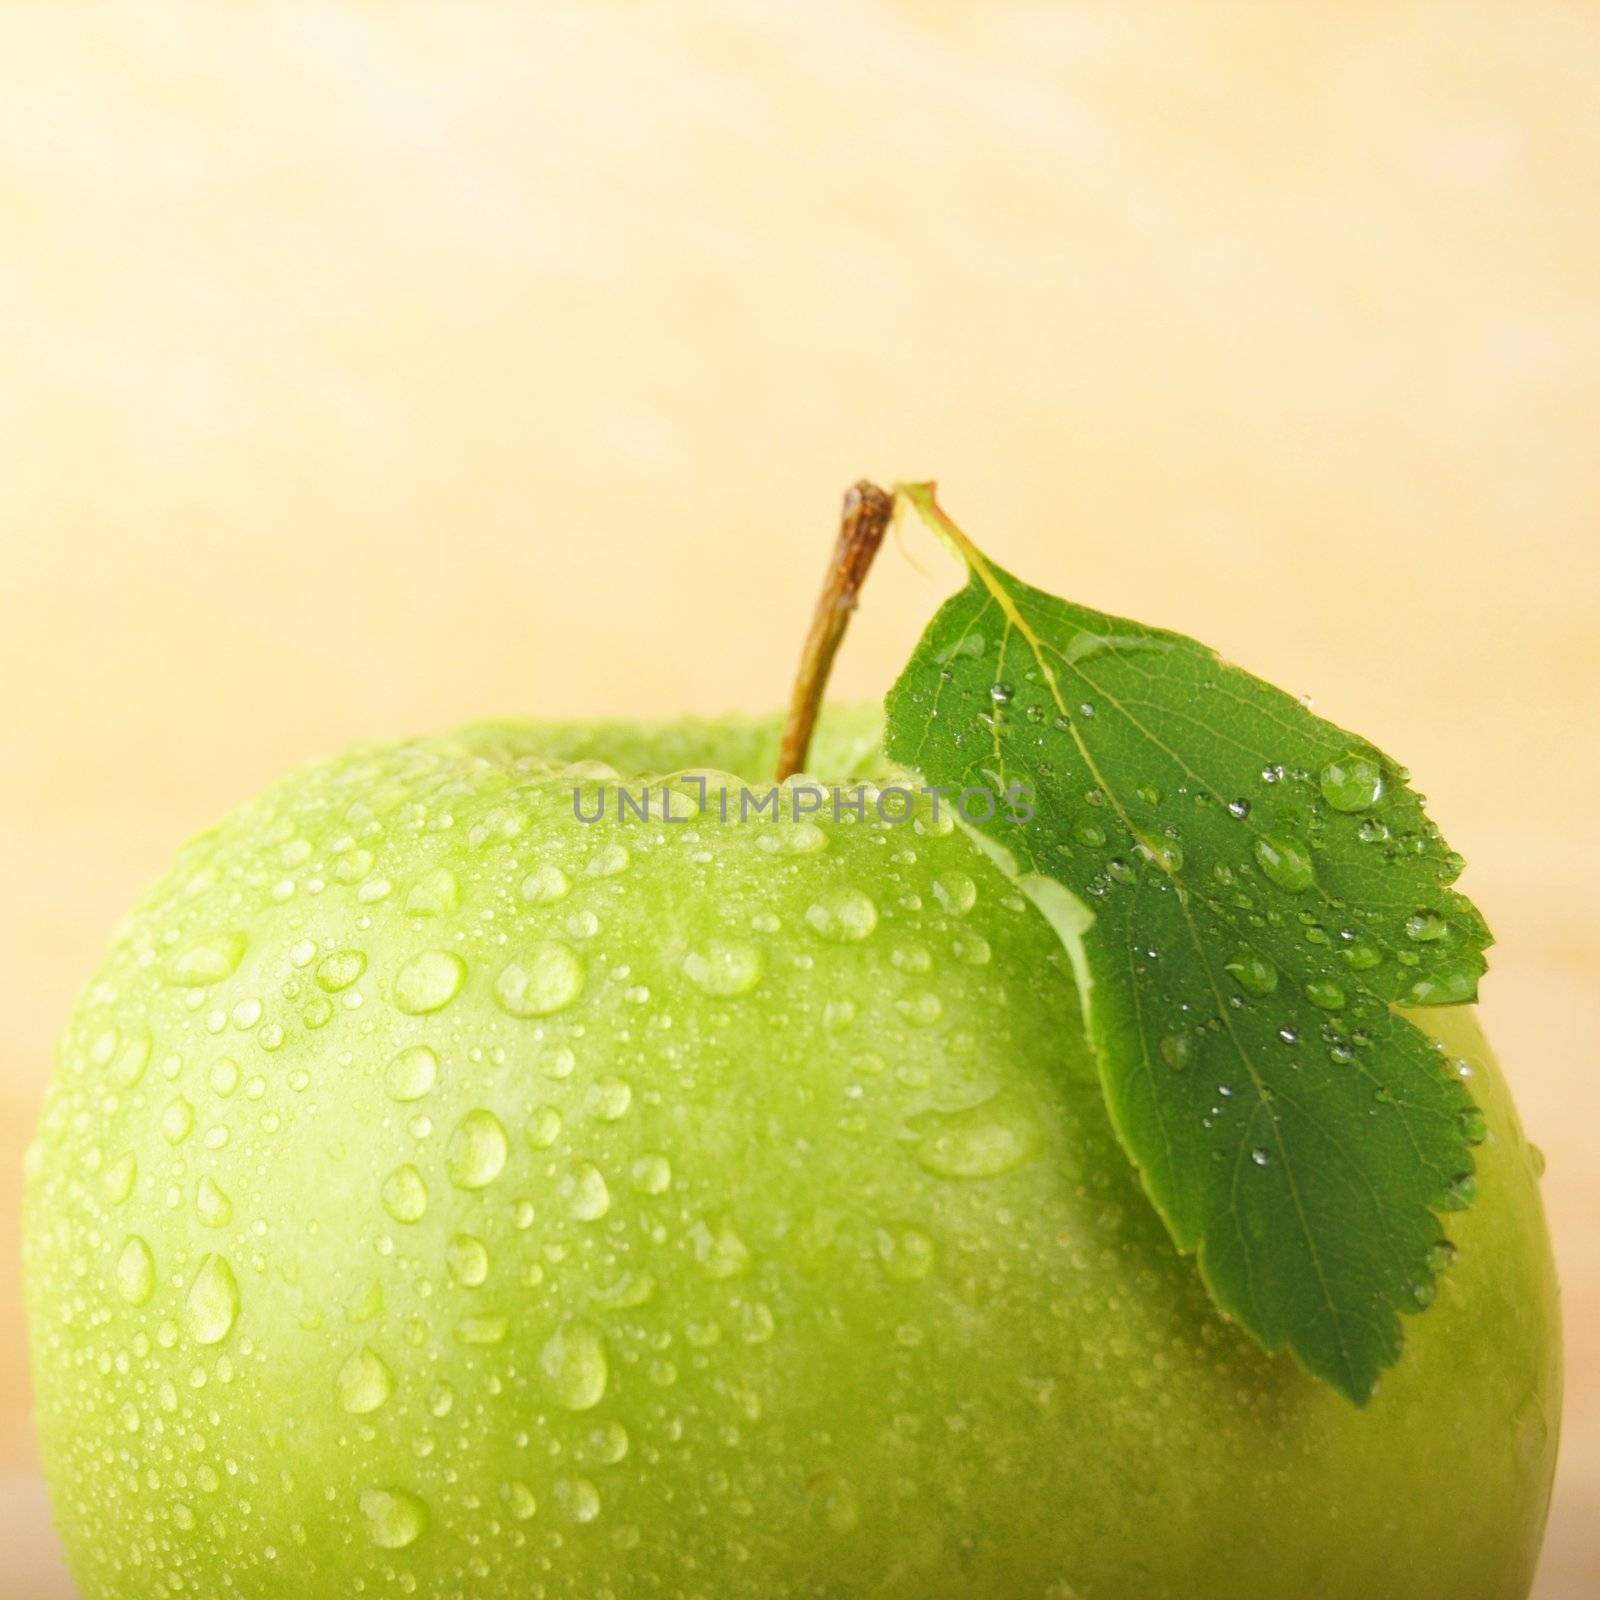 green apple on wood with copyspace showing healthy food concept